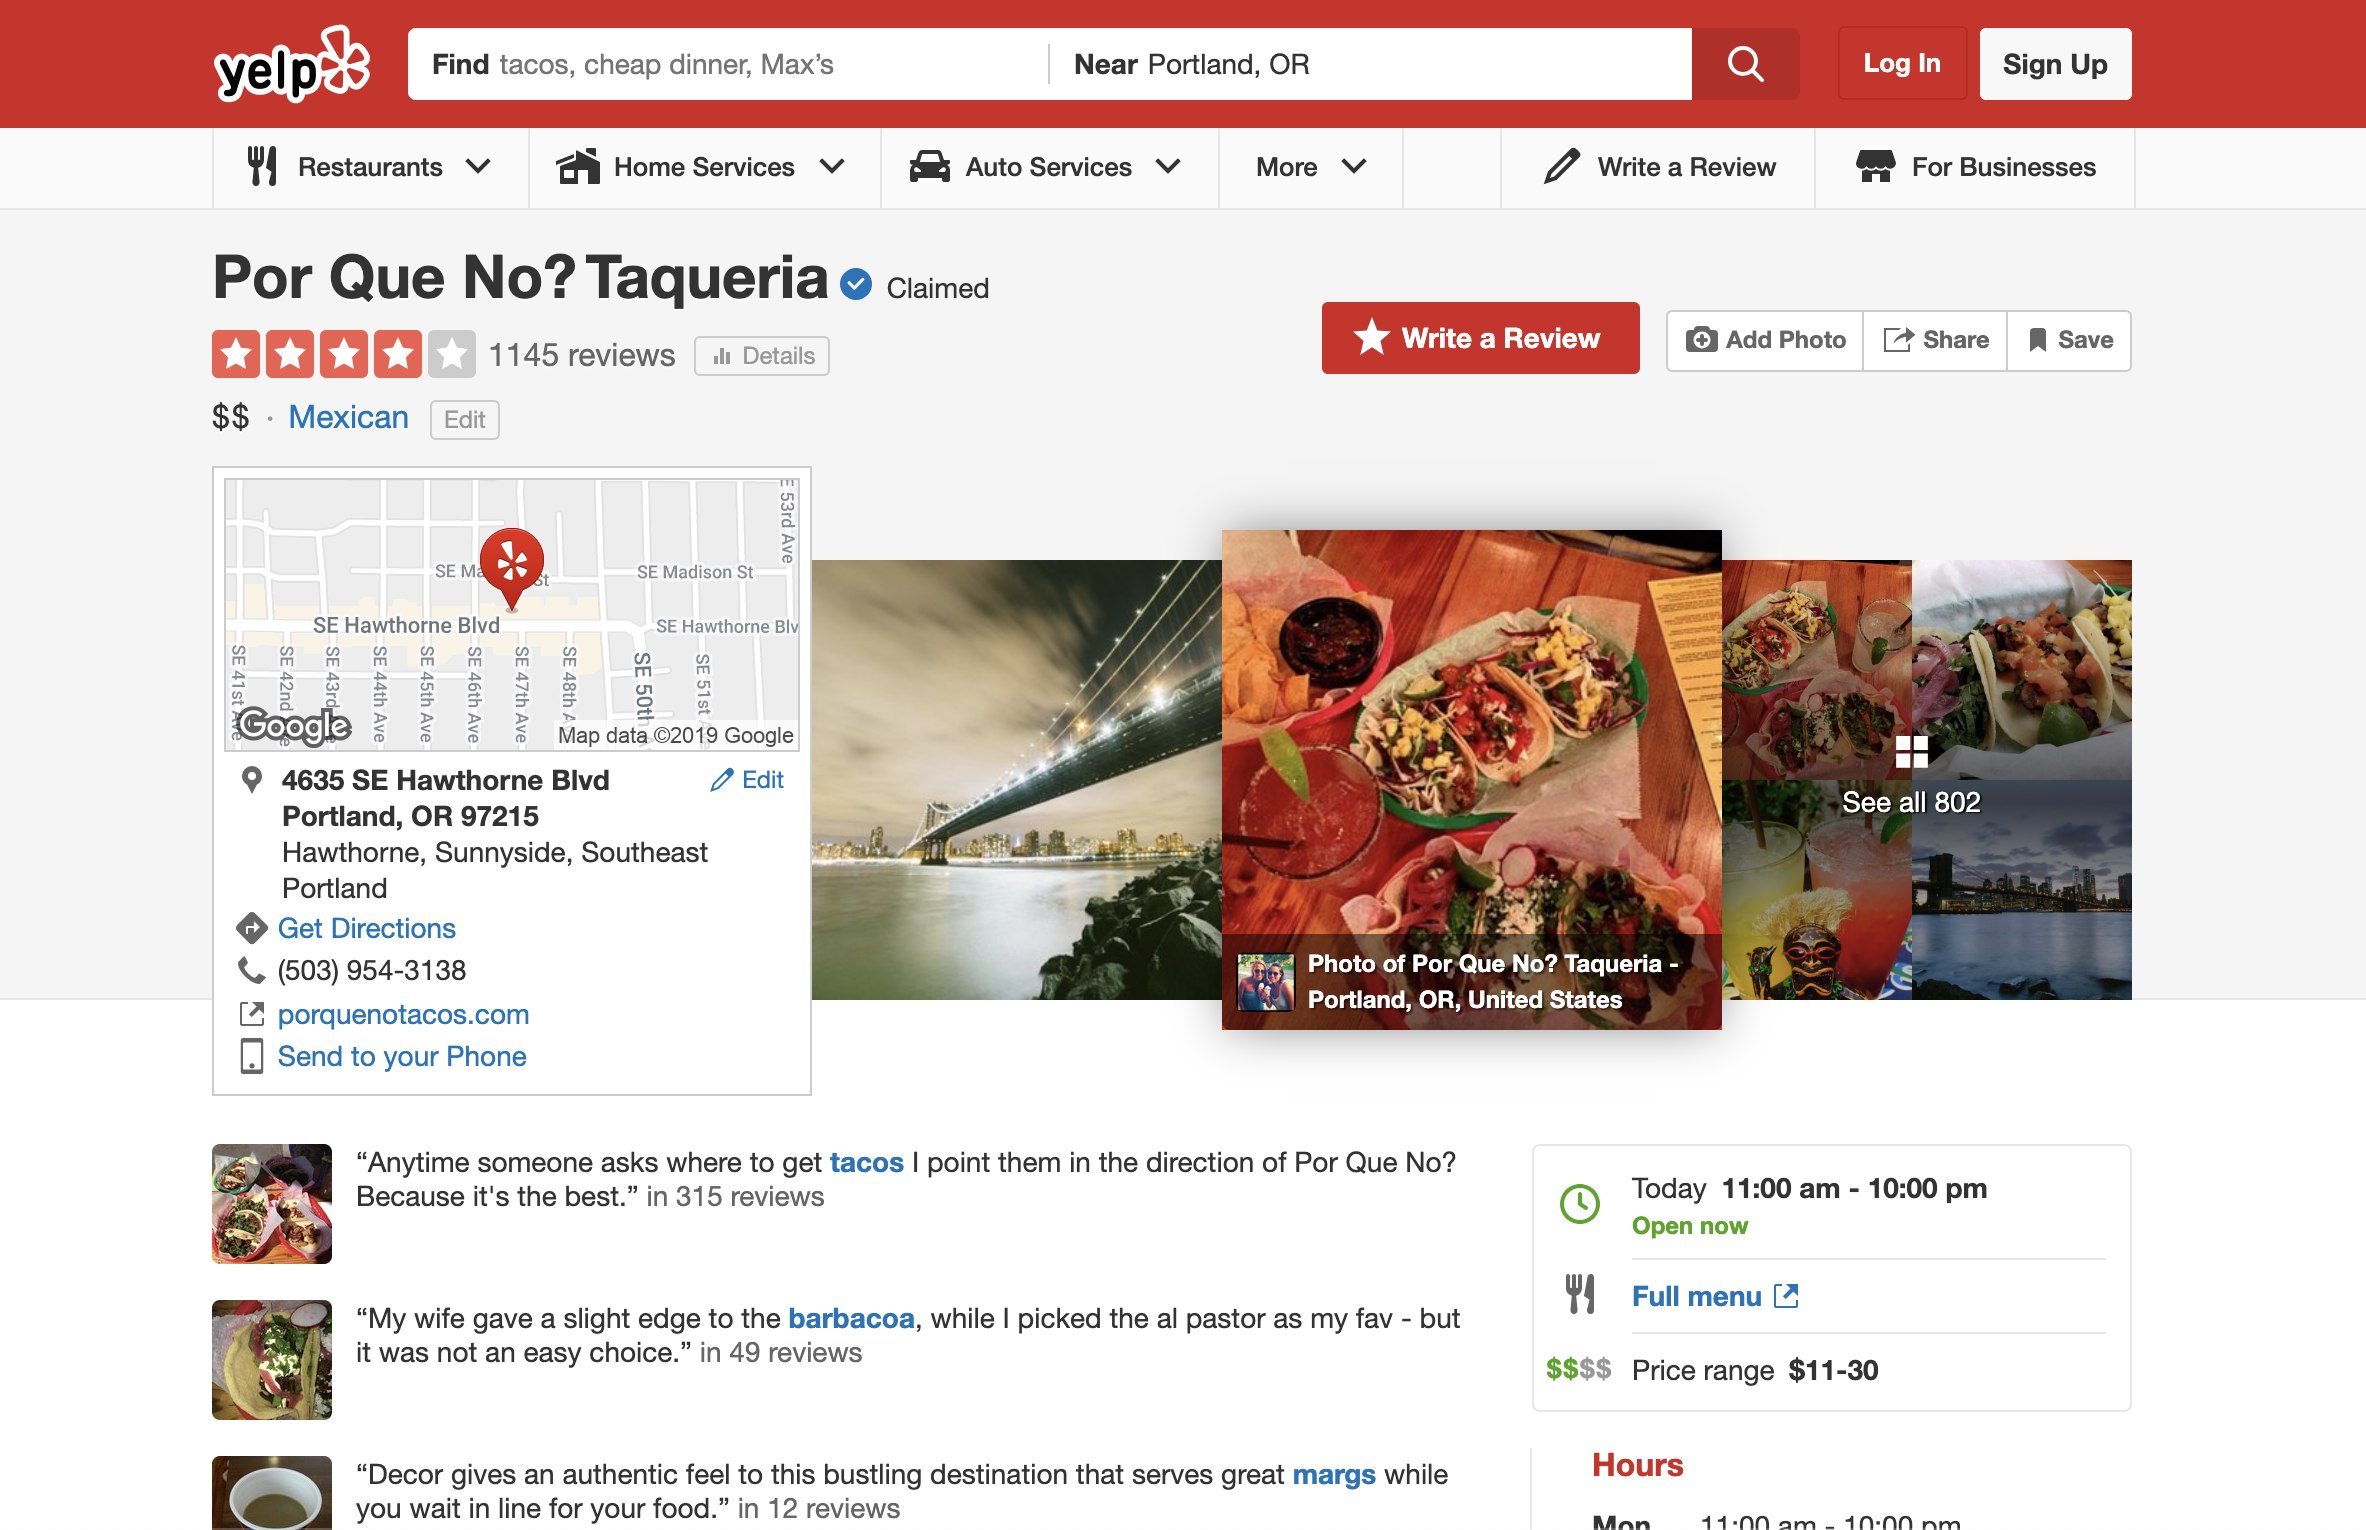 Yelp page showing reviews for Por Que No?, a taqueria in Portland, OR. The website shows the restaurant's location, their house, a link to their full menu, their average rating (4 stars over 1145 reviews), their price range (two on a scale of five), and several highlights of customer reviews.